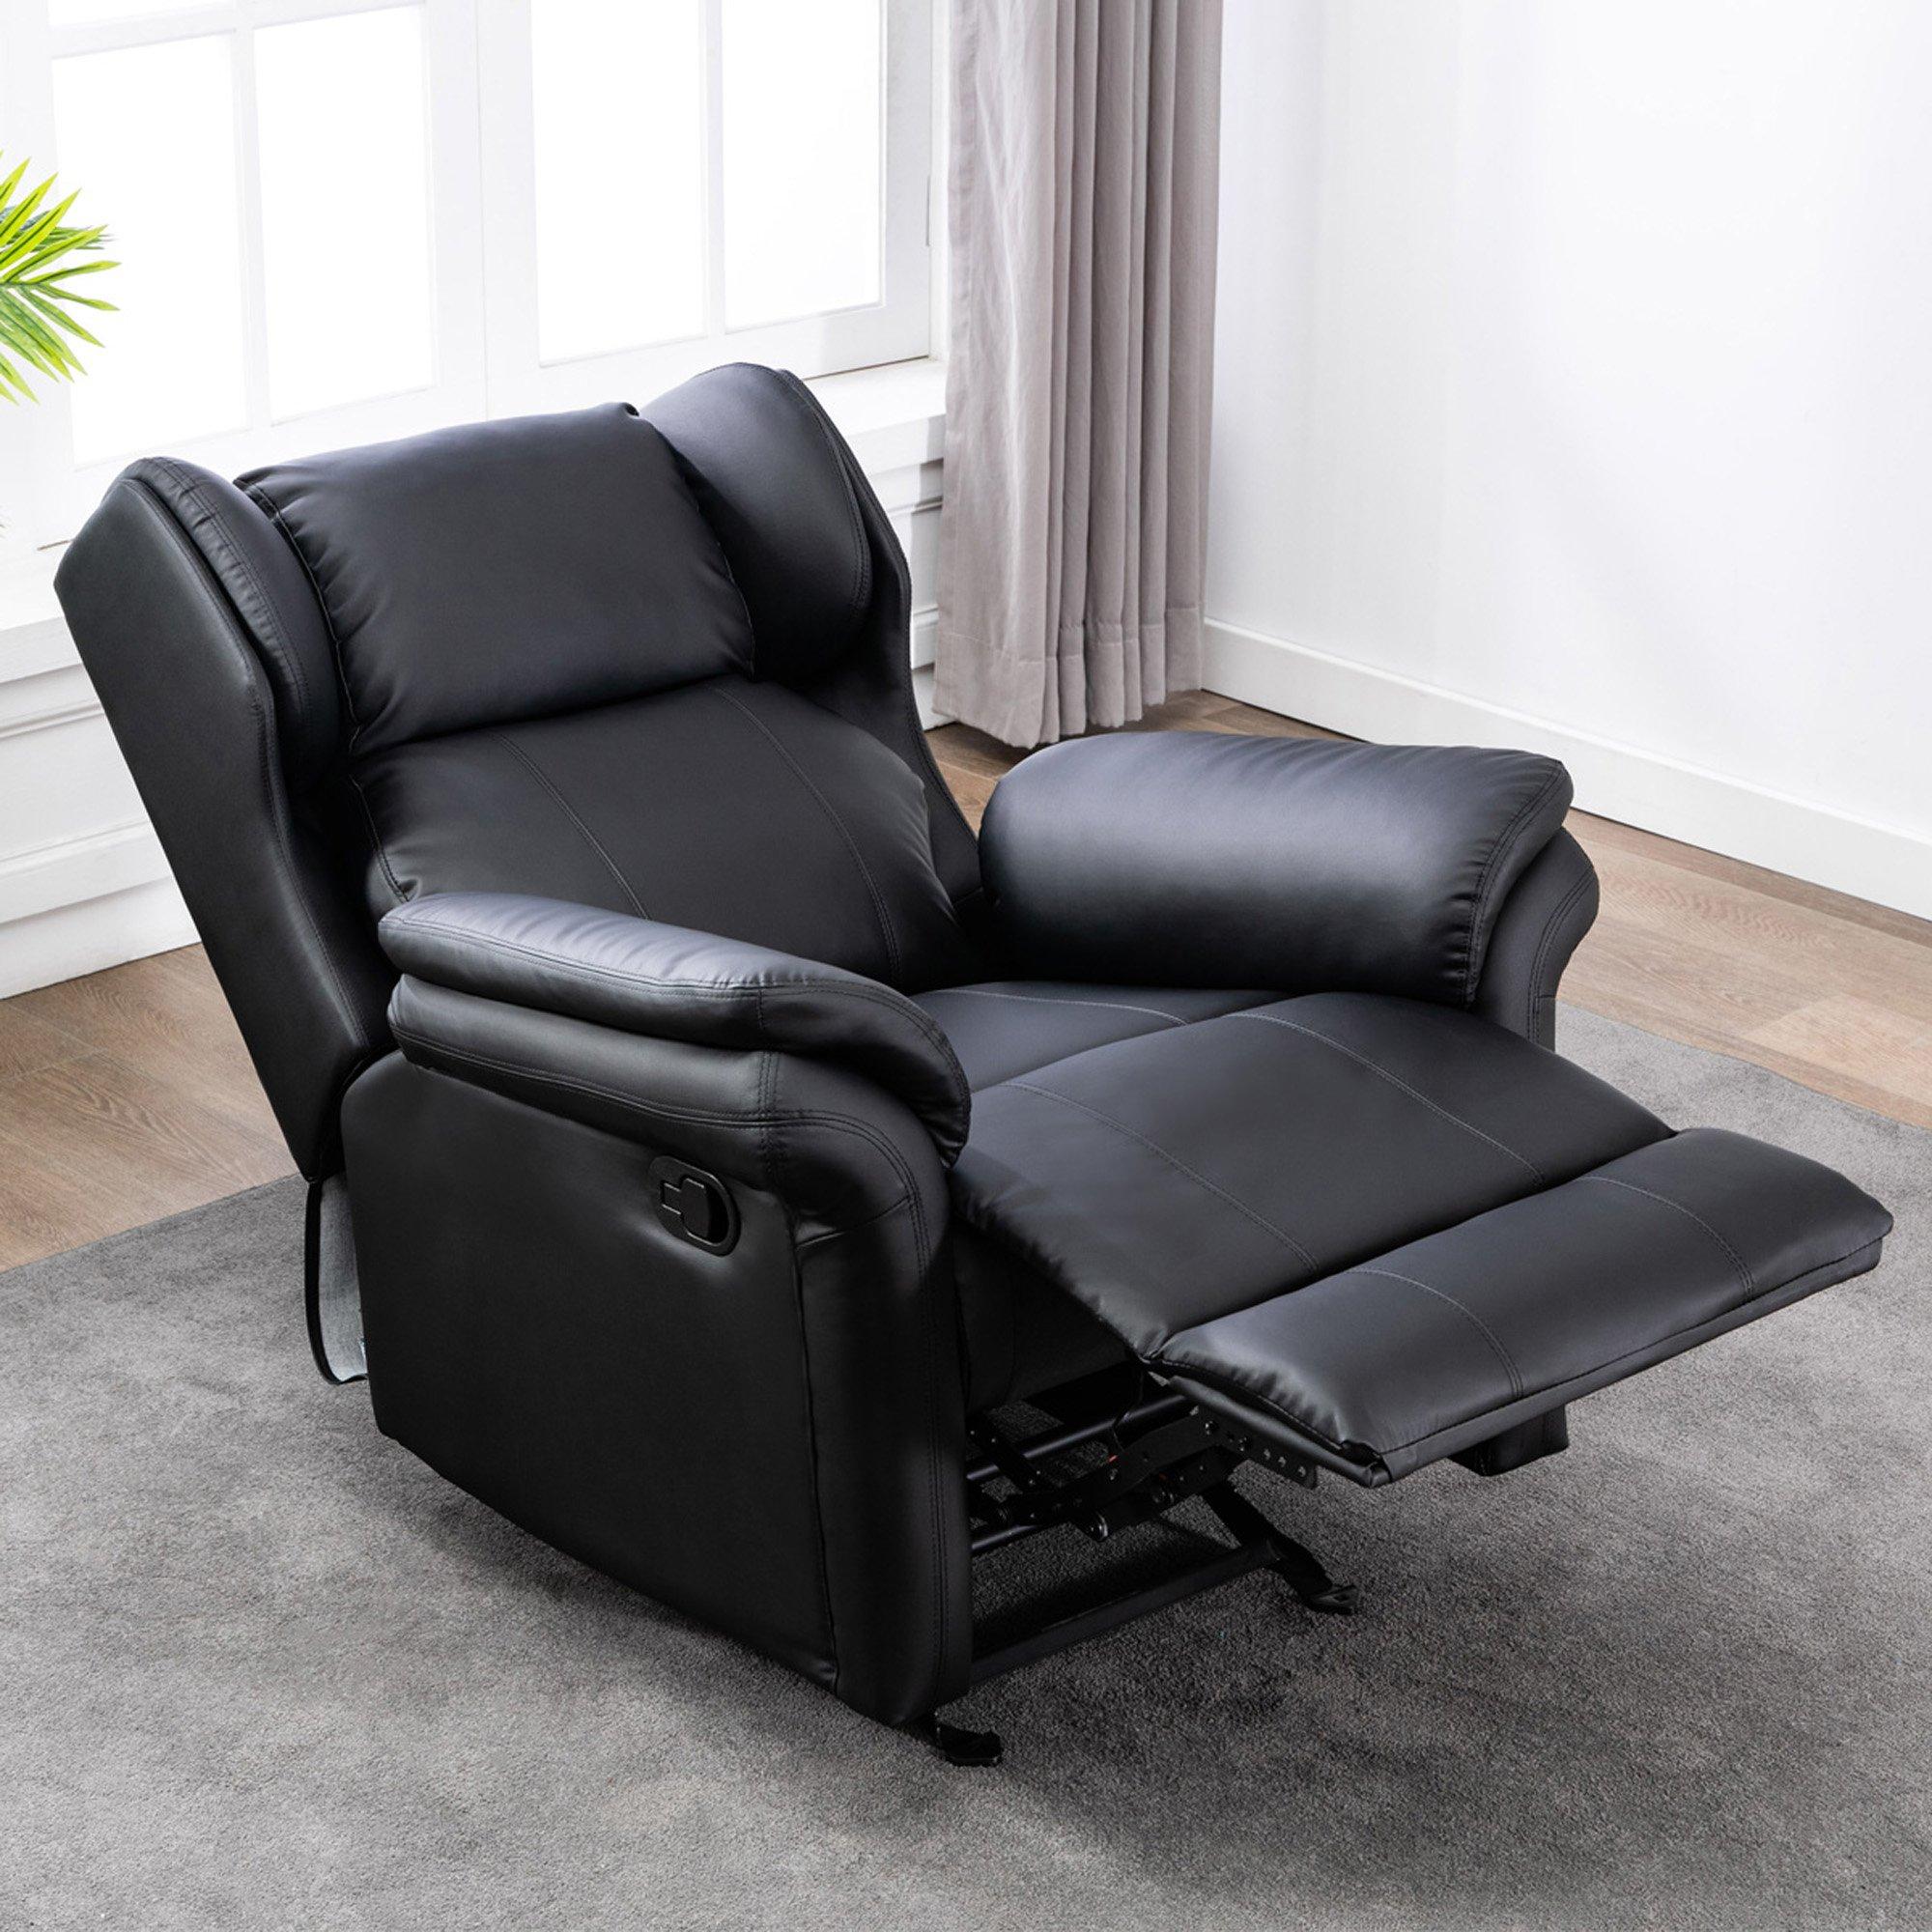 Oakley Manual Recliner Rocking Chair Wingback Design Bonded Leather